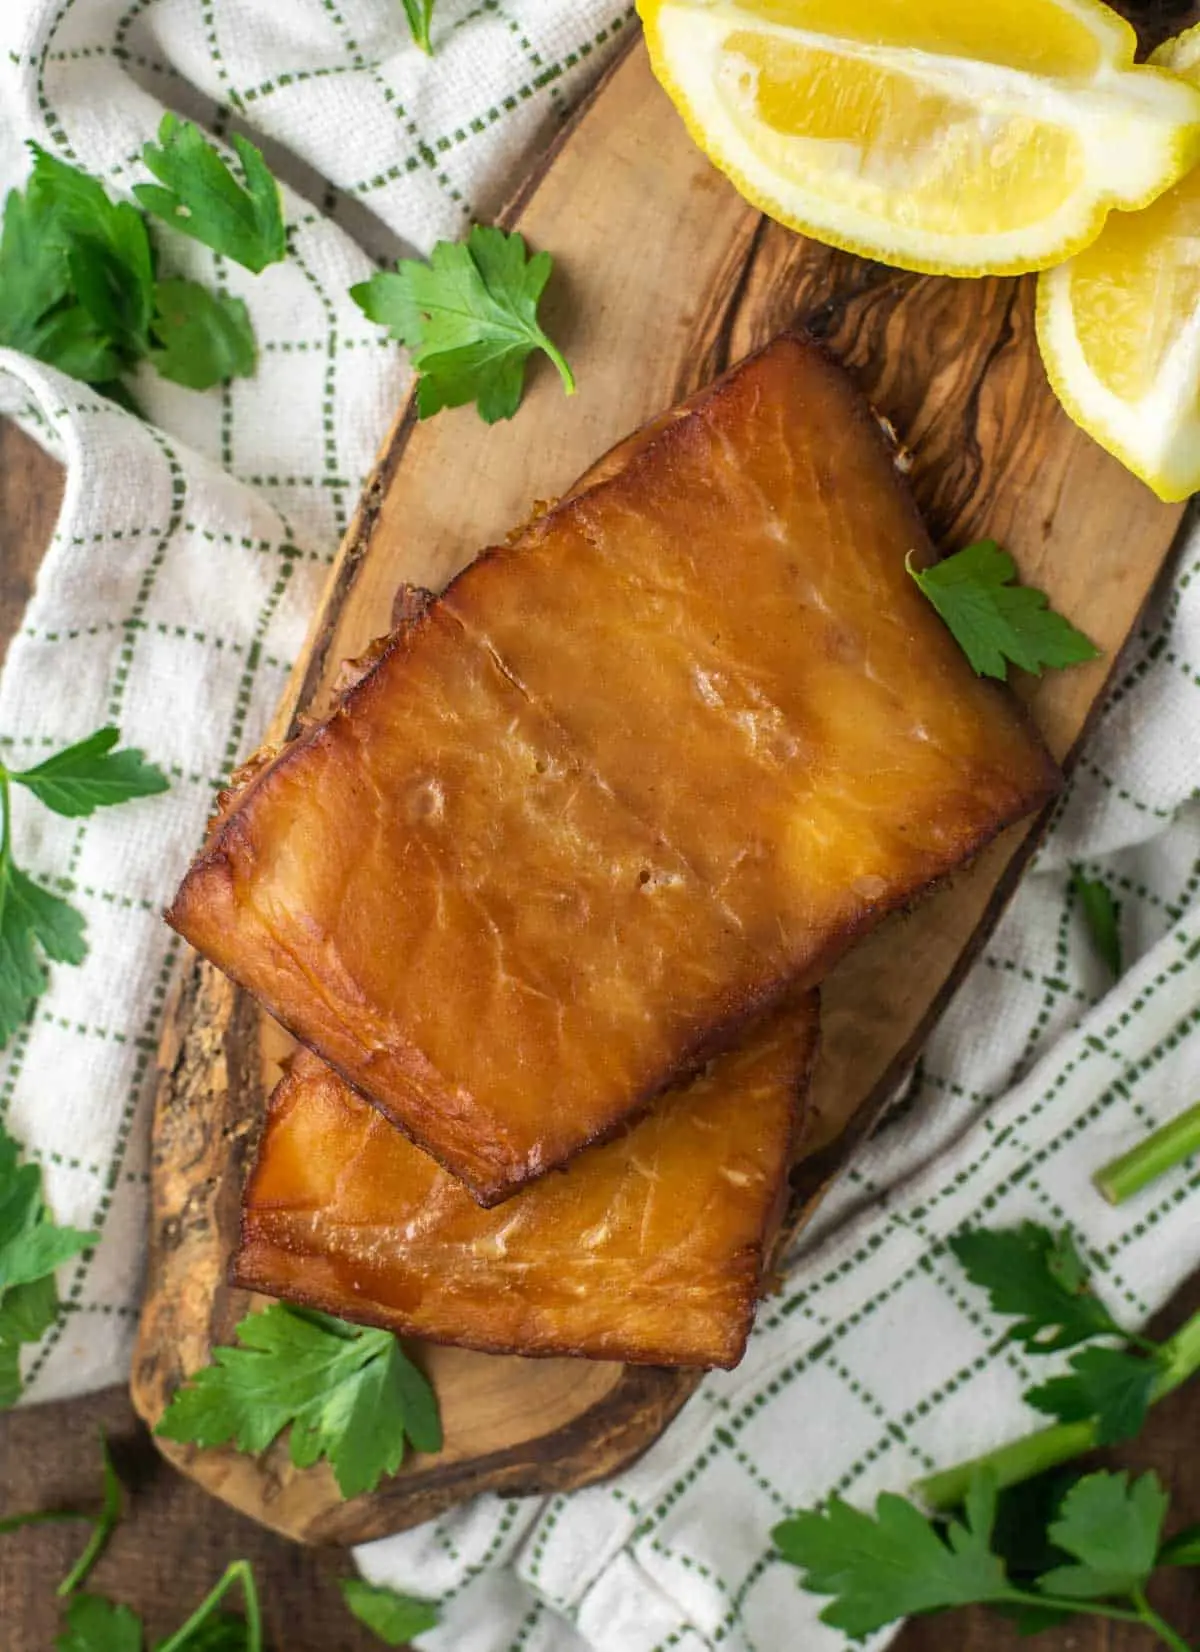 how to steam smoked cod - What is the best way to steam cod fish